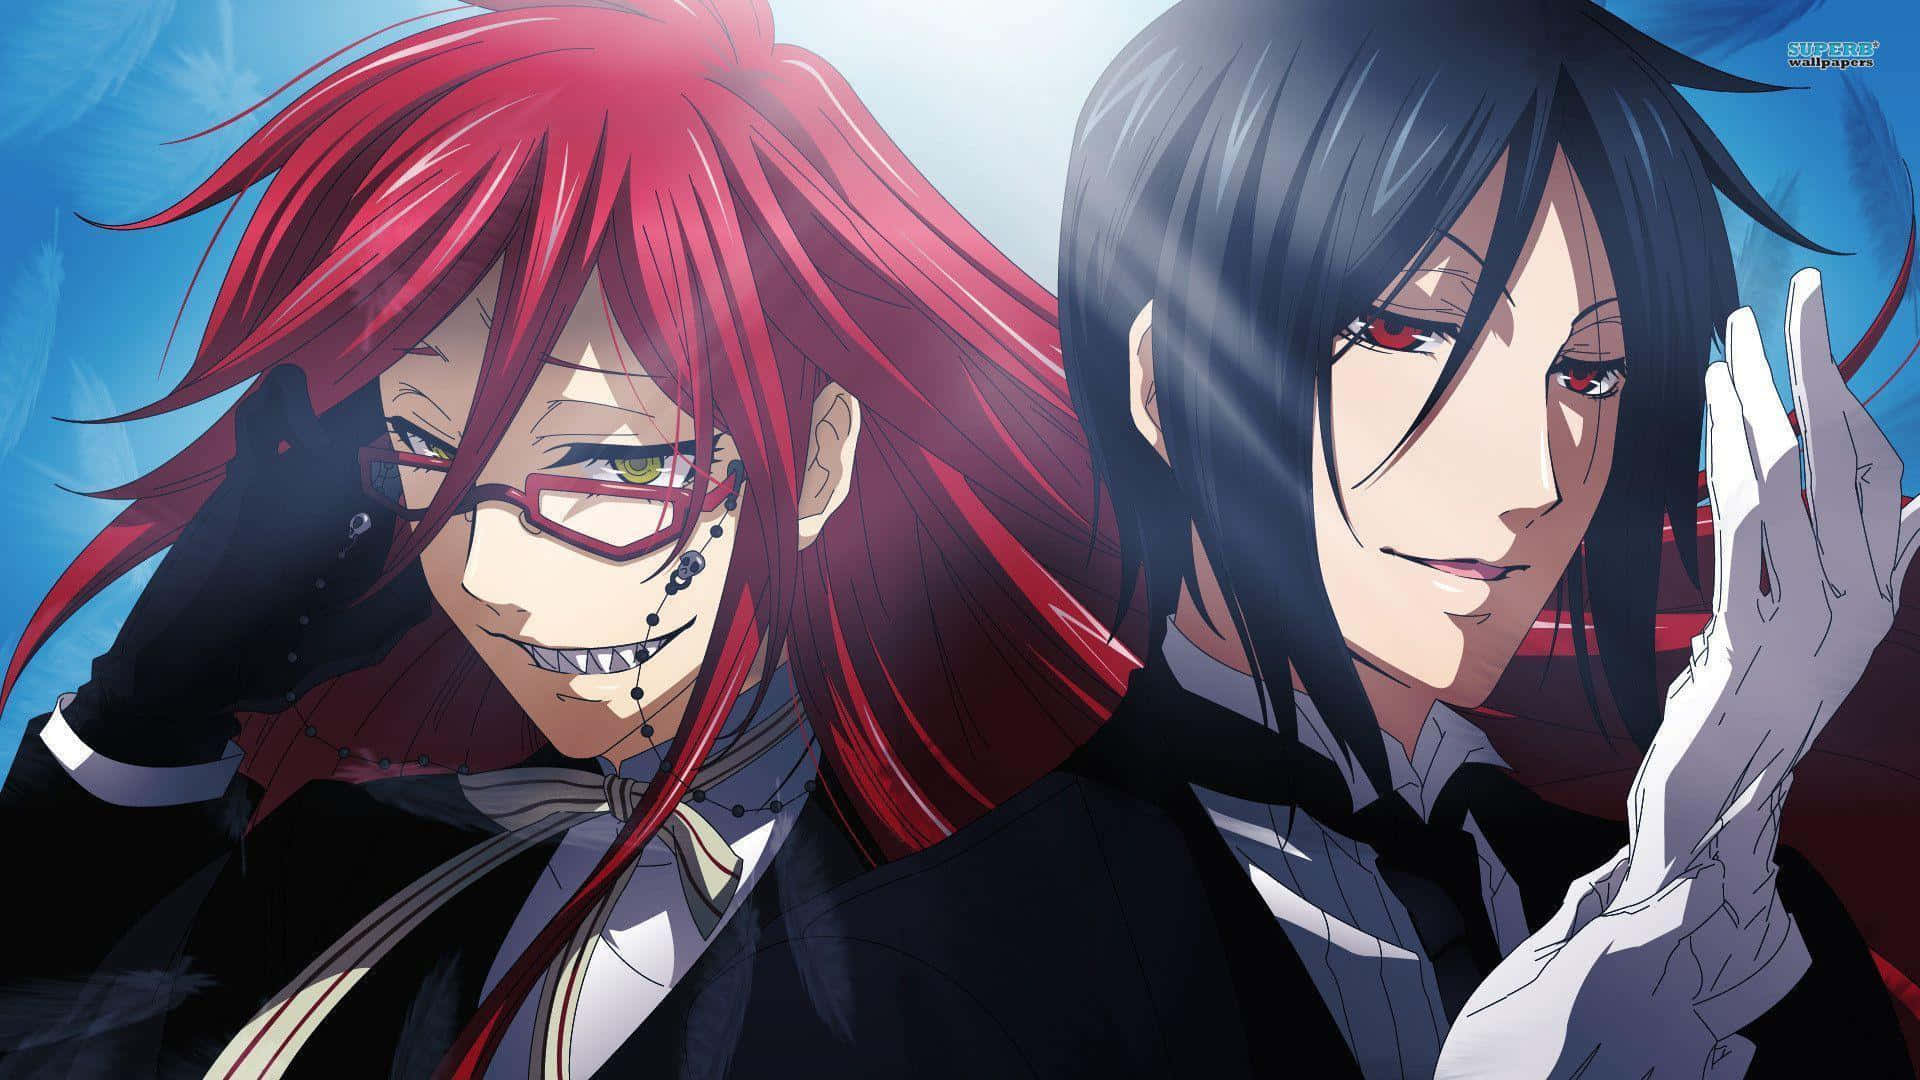 Explore the dark and mysterious world of Black Butler.